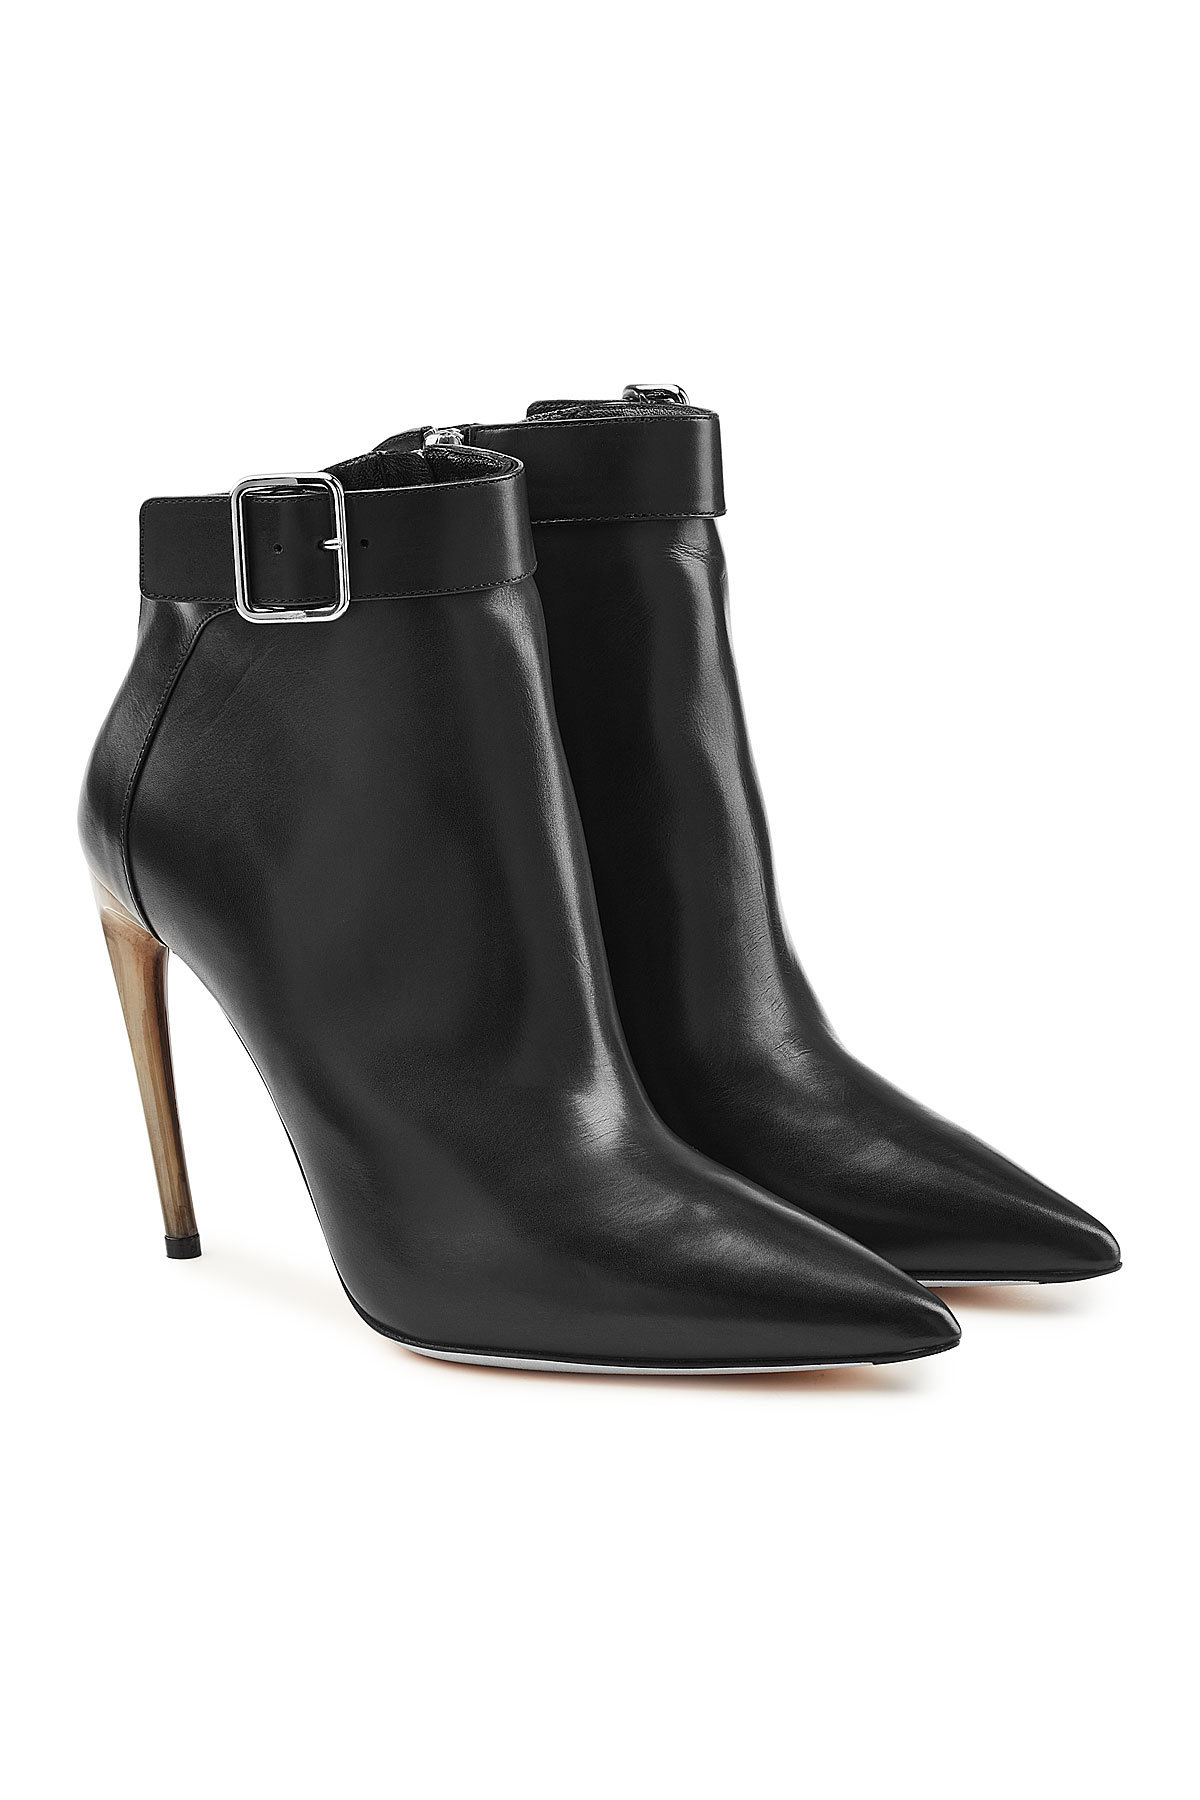 Leather Ankle Boots with Stiletto Heels by Alexander McQueen